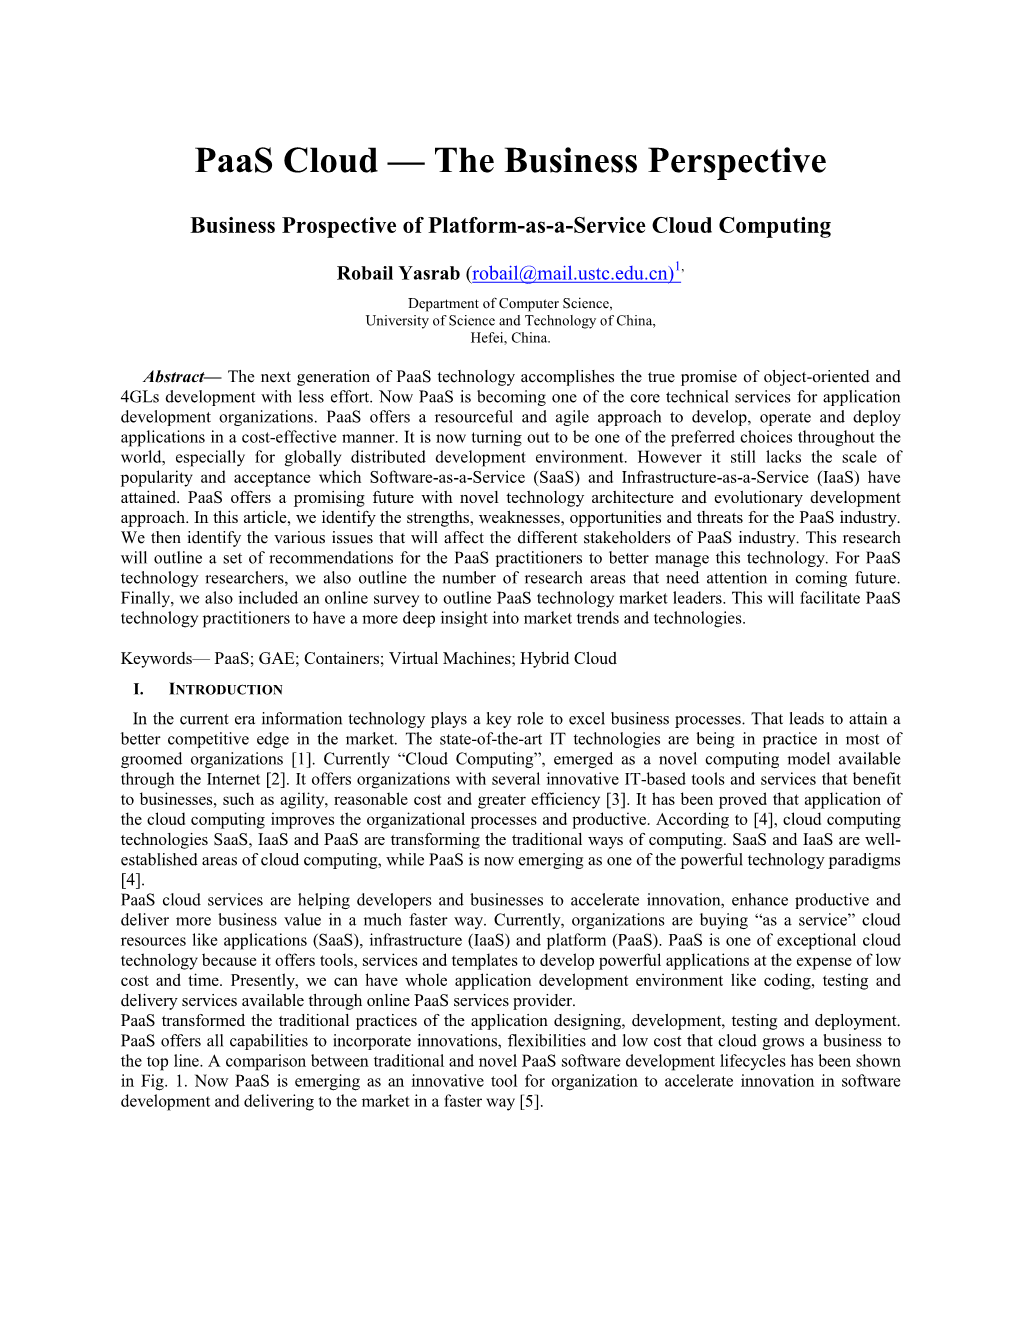 Paas Cloud — the Business Perspective